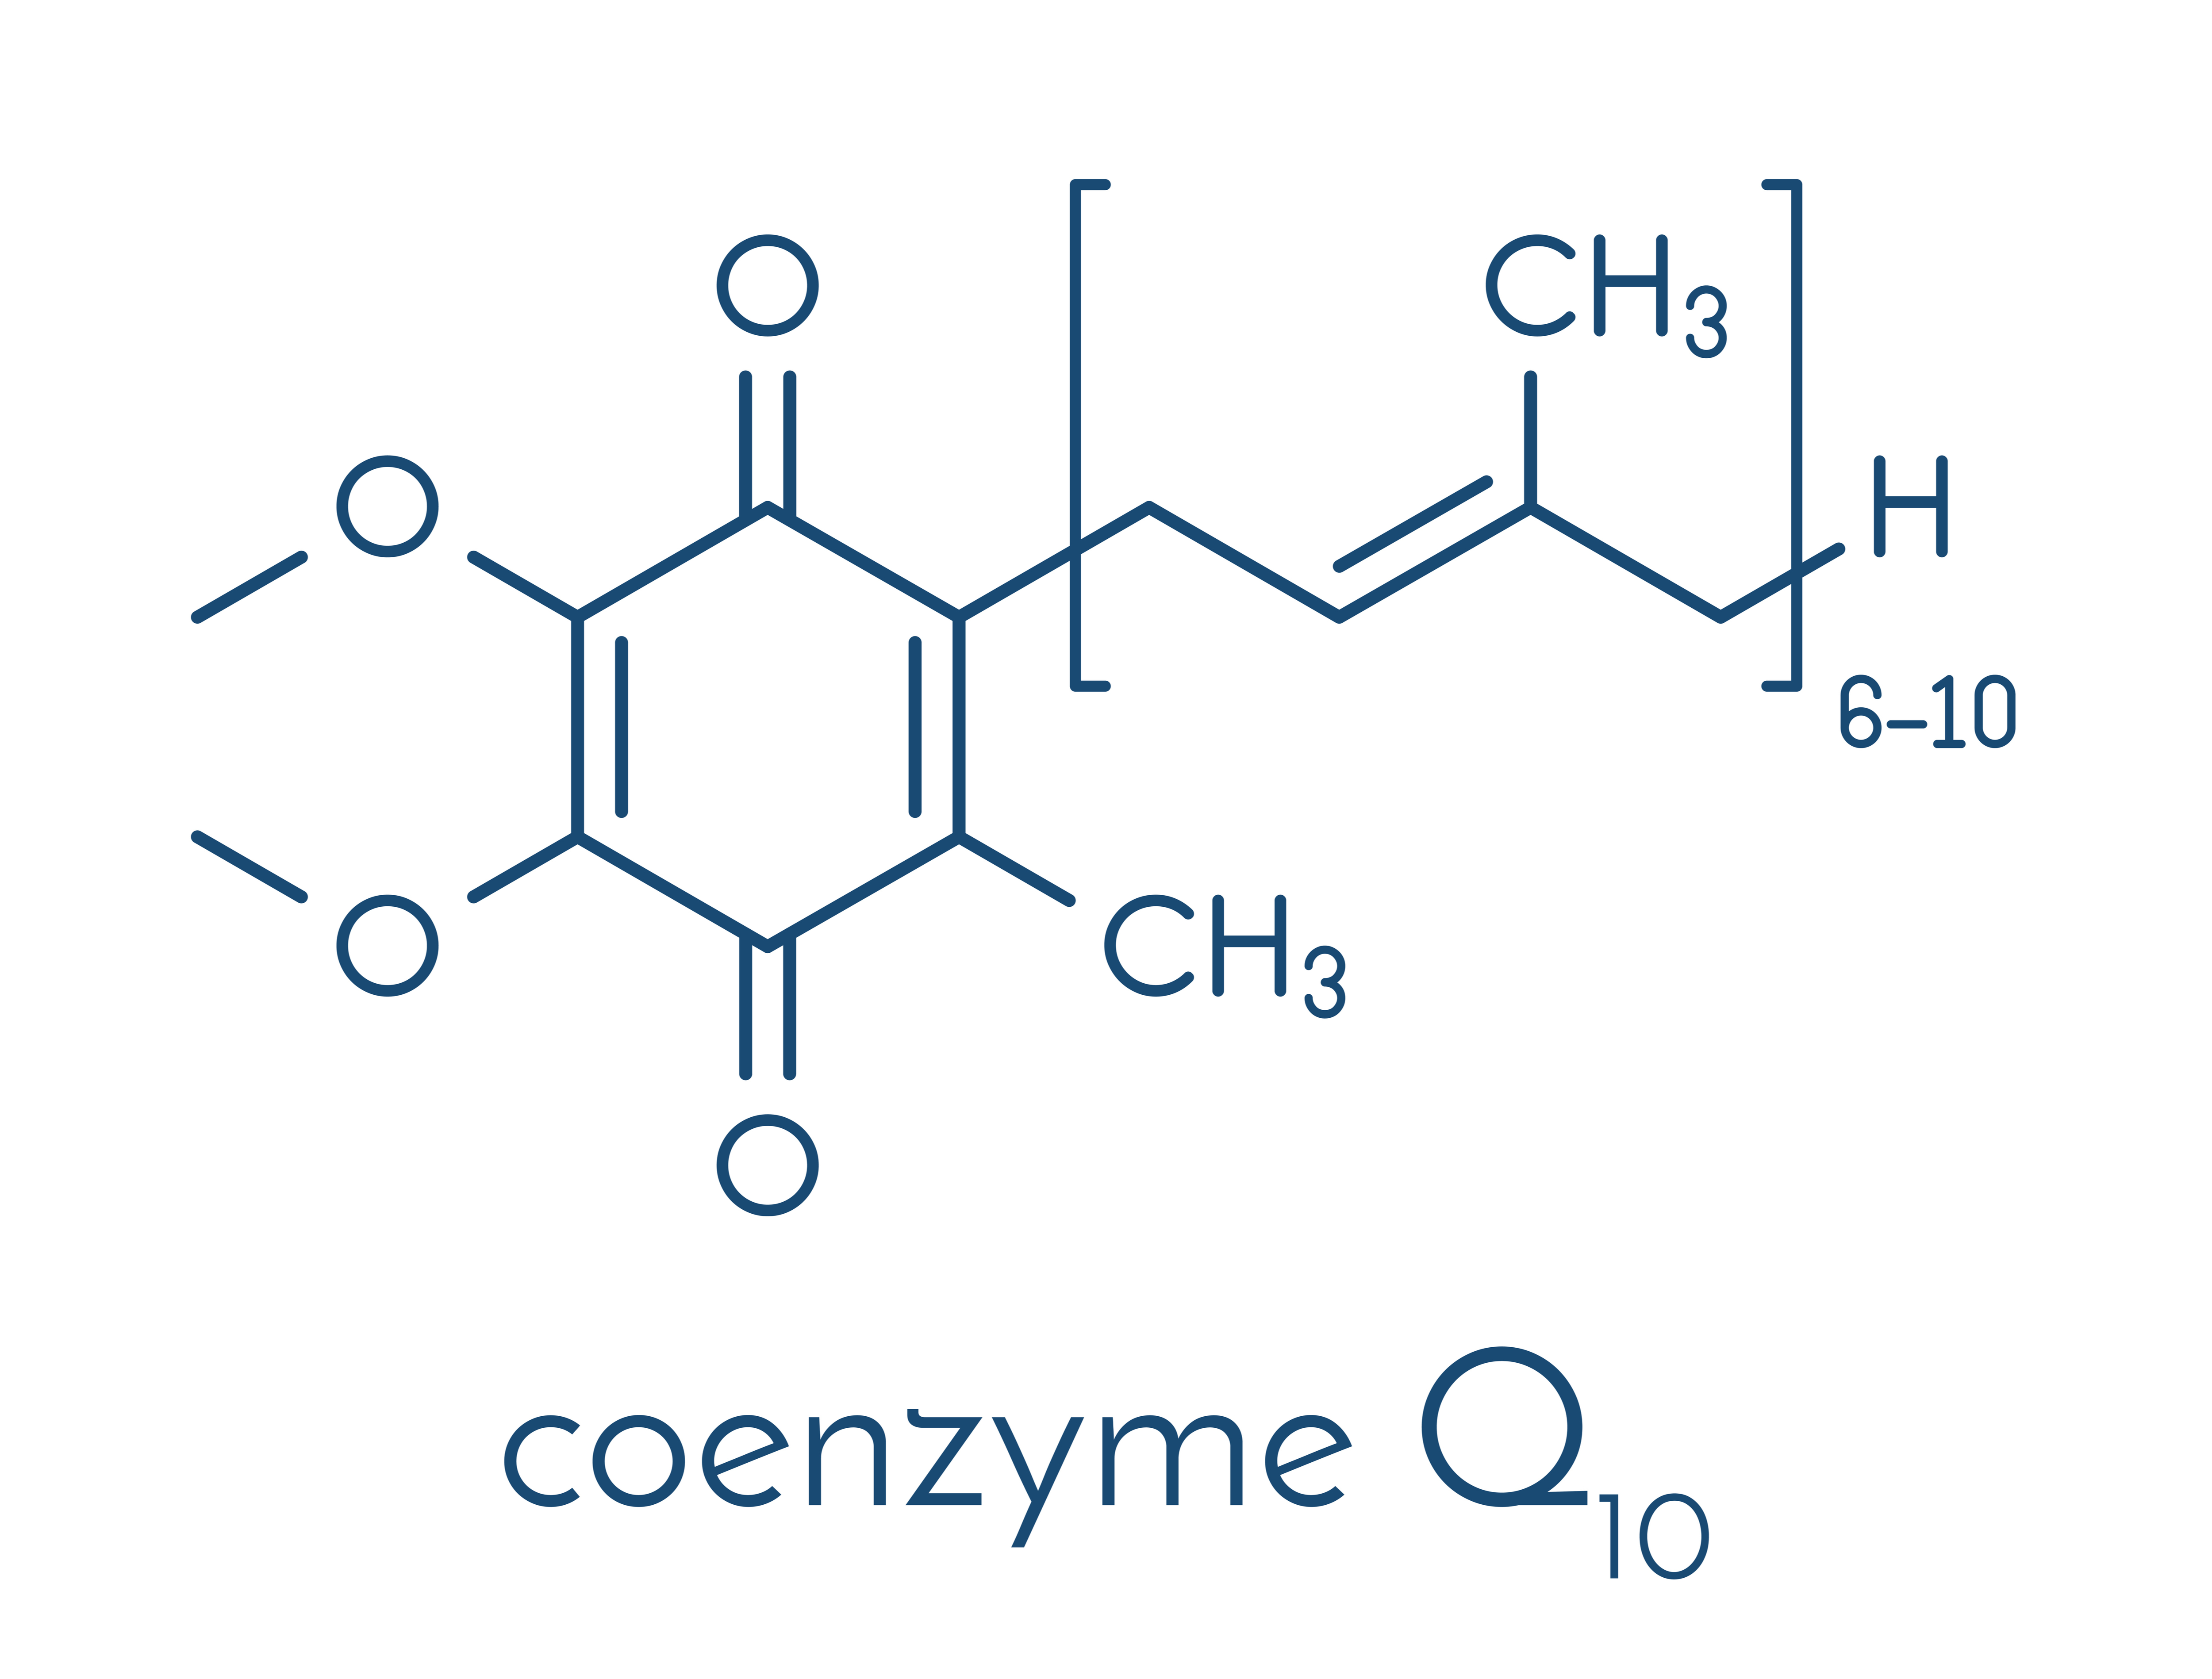 Chemical structure of coenzyme Q10